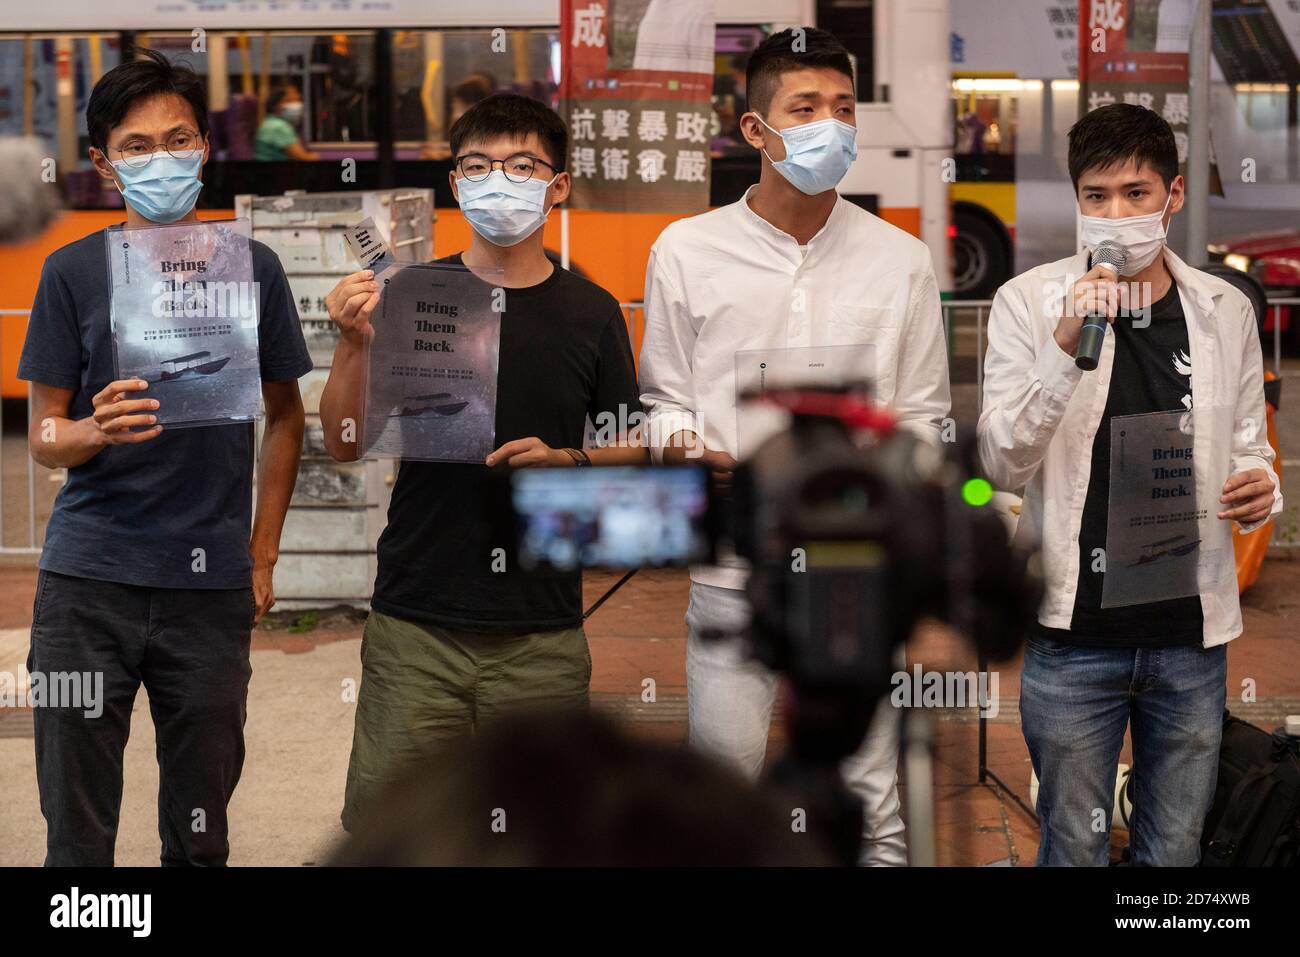 Pro-democracy activists Eddie Chu (L), Joshua Wong (L2), Owen Chow (R2), and Lester Shum (R) distribute leaflets while talking to the press in support of the 12 activists detained in Mainland China during the rally.Pro democracy activates rally in Hong Kong in support of the 12 Hongkongers detained in Mainland China after allegedly trying to flee to Taiwan to claim political asylum in August 2020. The 12 detainees has committed different political crimes in Hong Kong and were on court bail when they fled. Stock Photo